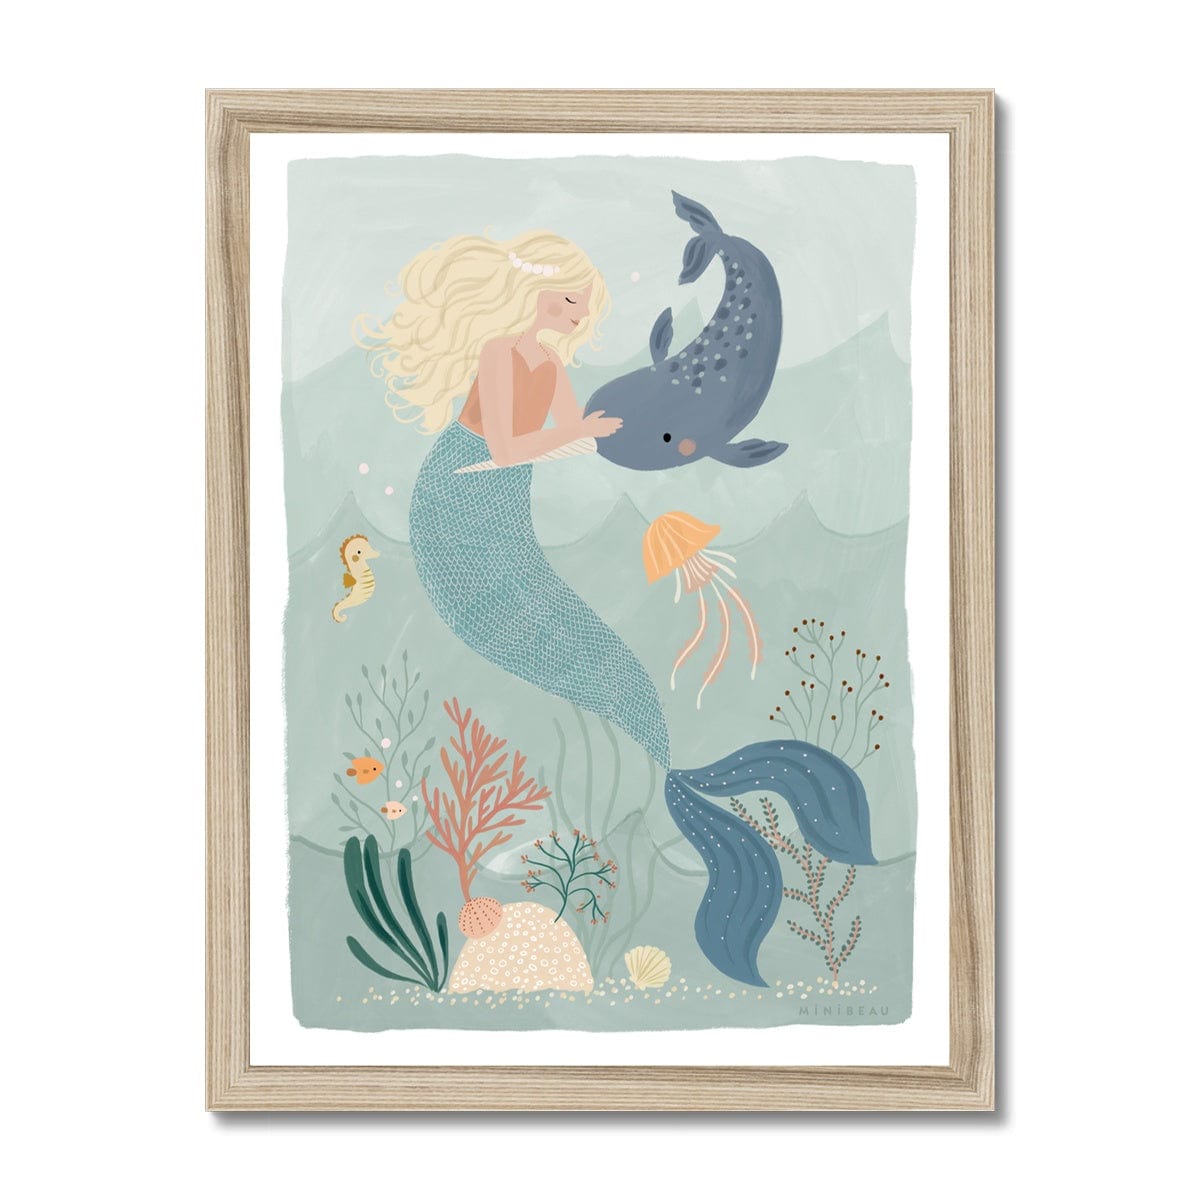 Picture of a hand-painted picture depicting Coral the Mermaid petting a Narwhal at the bottom of the sea. Coral is blonde and wearing an orange top and her tail is a deep teal. She is wearing a pearl headband. In the background are 2 small angel fish, a sea horse and a jellyfish amongst sea foliage with a white border in a natural wood frame